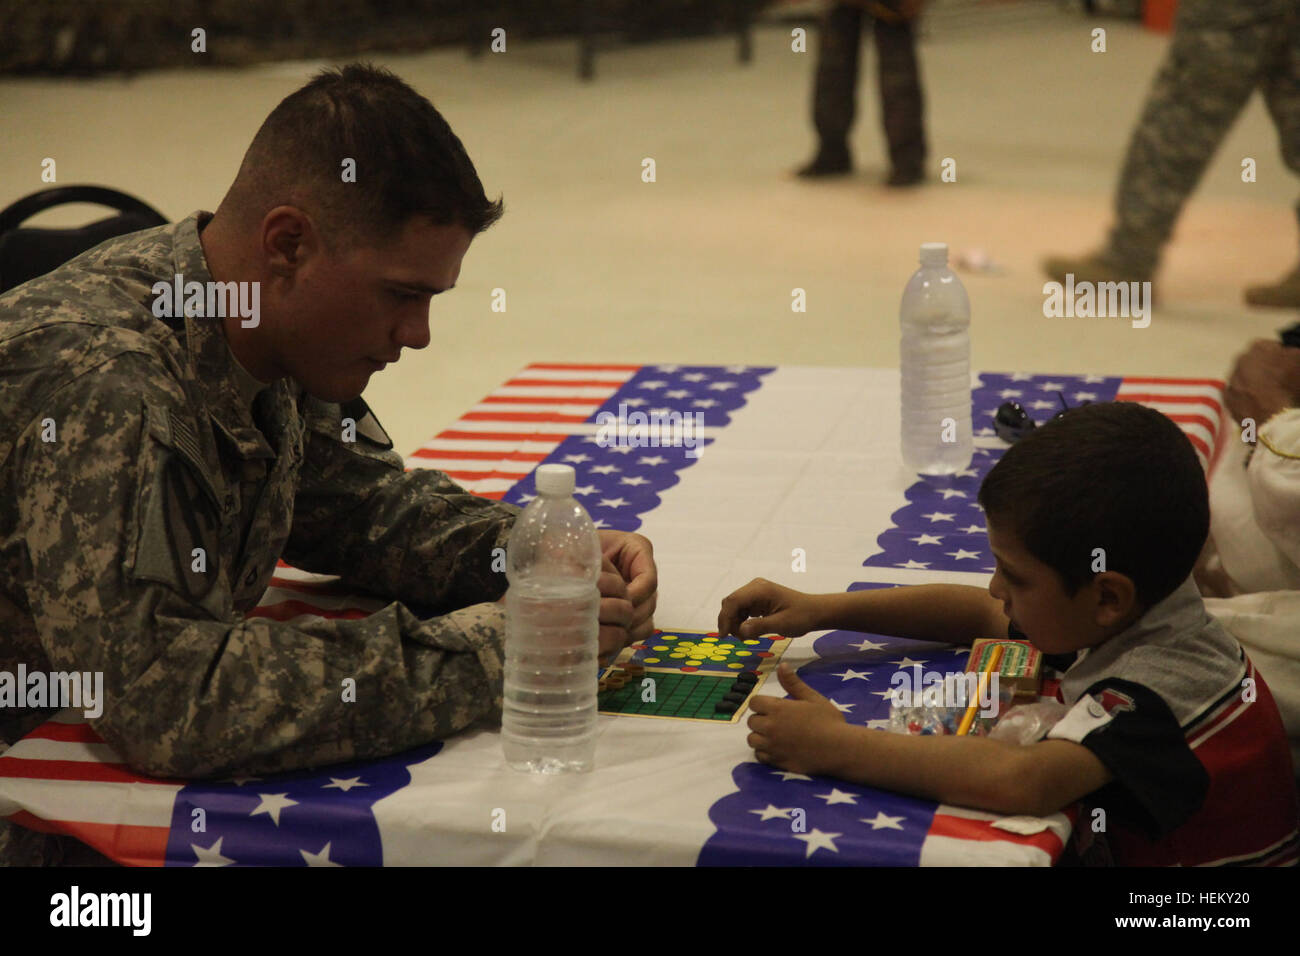 A U.S. Army soldier of 2nd Advise and Assist Brigade, 1st Cavalry Division, plays a board game with an Iraqi boy during Iraqi Kids' Day at Joint Base Balad in Salah Aldin province, Iraq, Oct. 1, 2011. The purpose of Iraqi Kids' Day is to build positive relations with Iraqi children, let them know that the U.S. forces in Iraq are friendly and are here to help the well-being of Iraq's citizens. All these soldiers and airmen are in Iraq in support of Operation New Dawn. (Photo by Pfc. Nikko-Angelo Matos) Iraqi Kids' Day 111001-A-YV529-030 Stock Photo